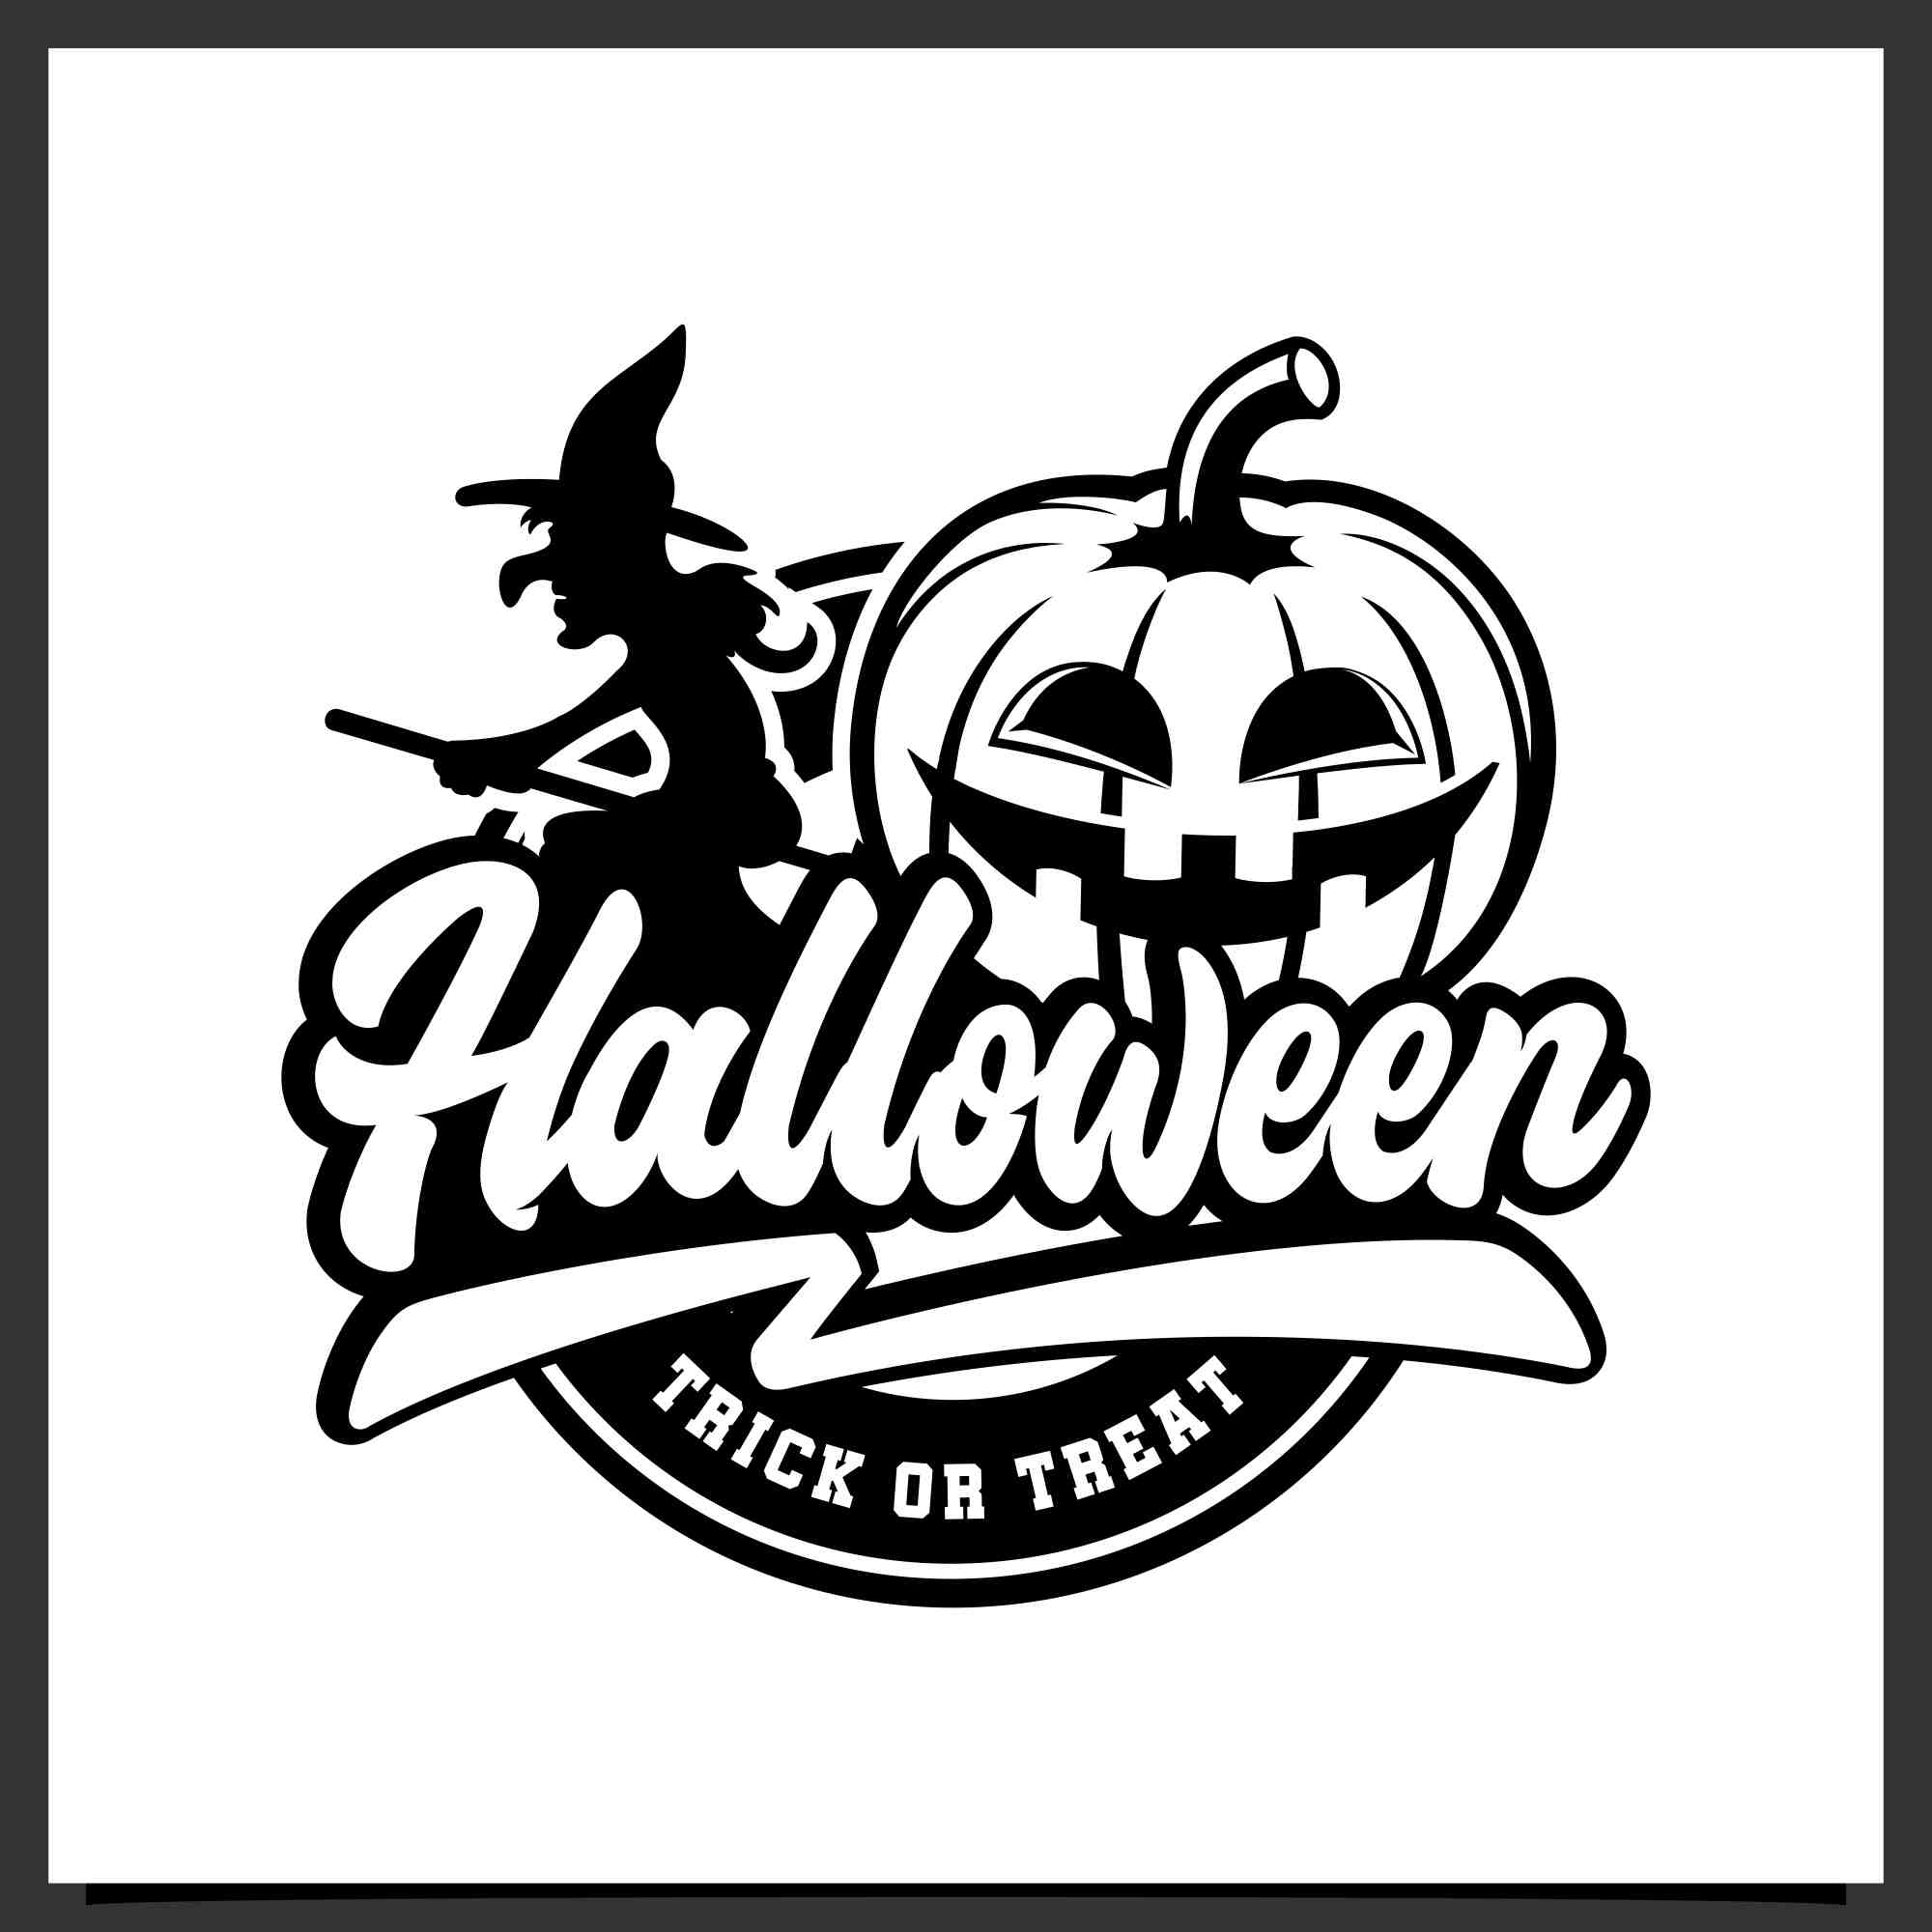 5 Happy halloween lettering design collection - $6 preview image.